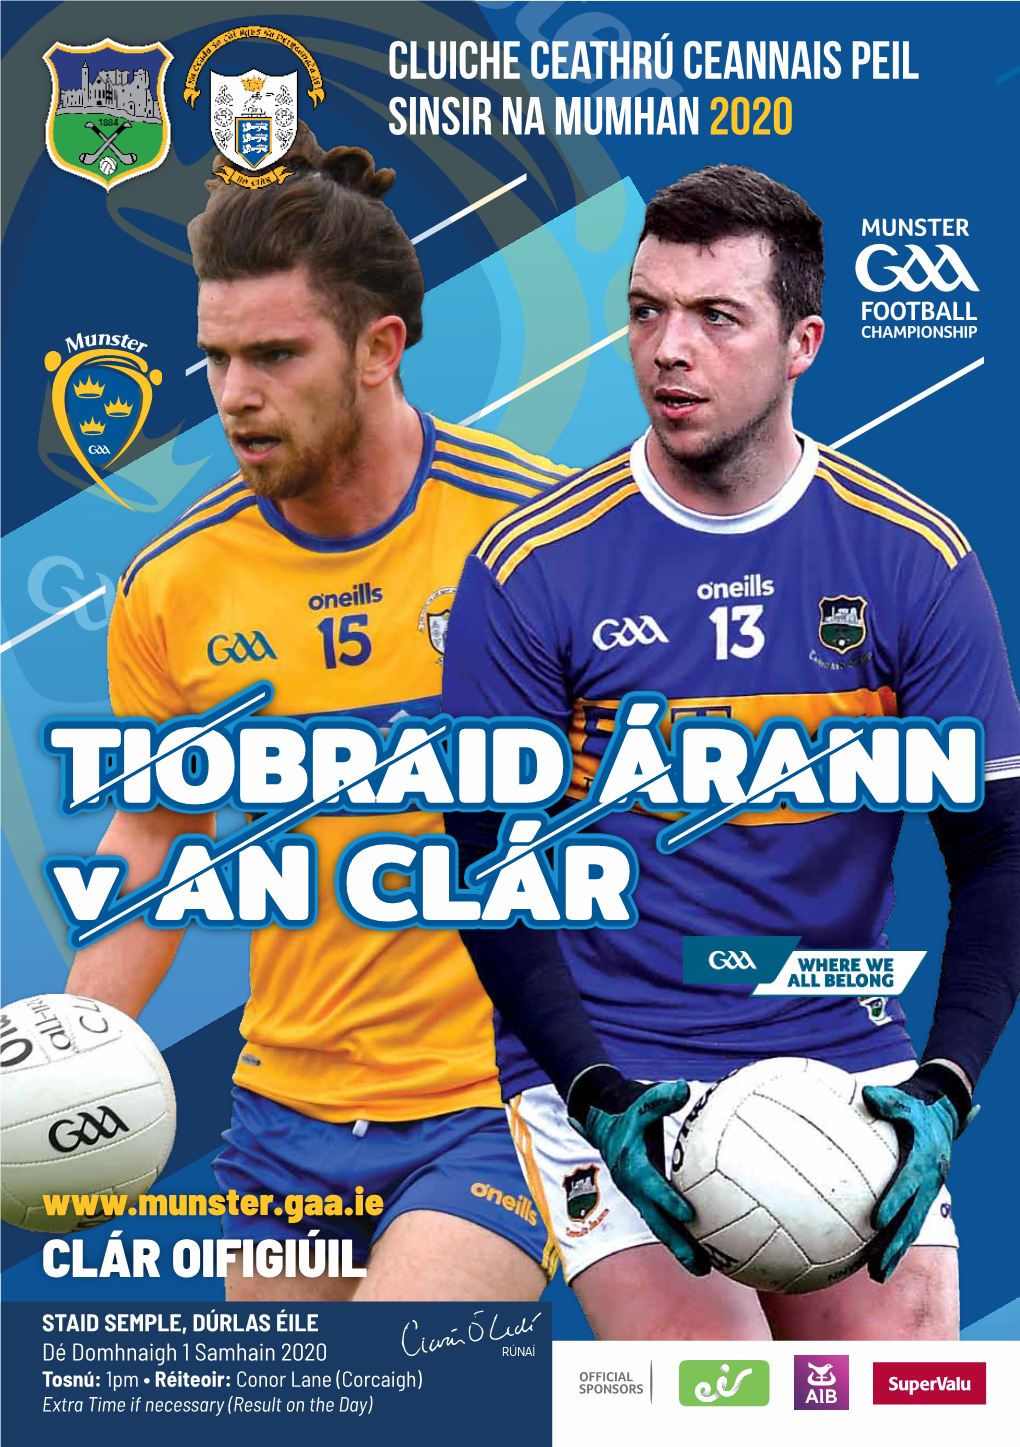 View the Match Programme in PDF Format